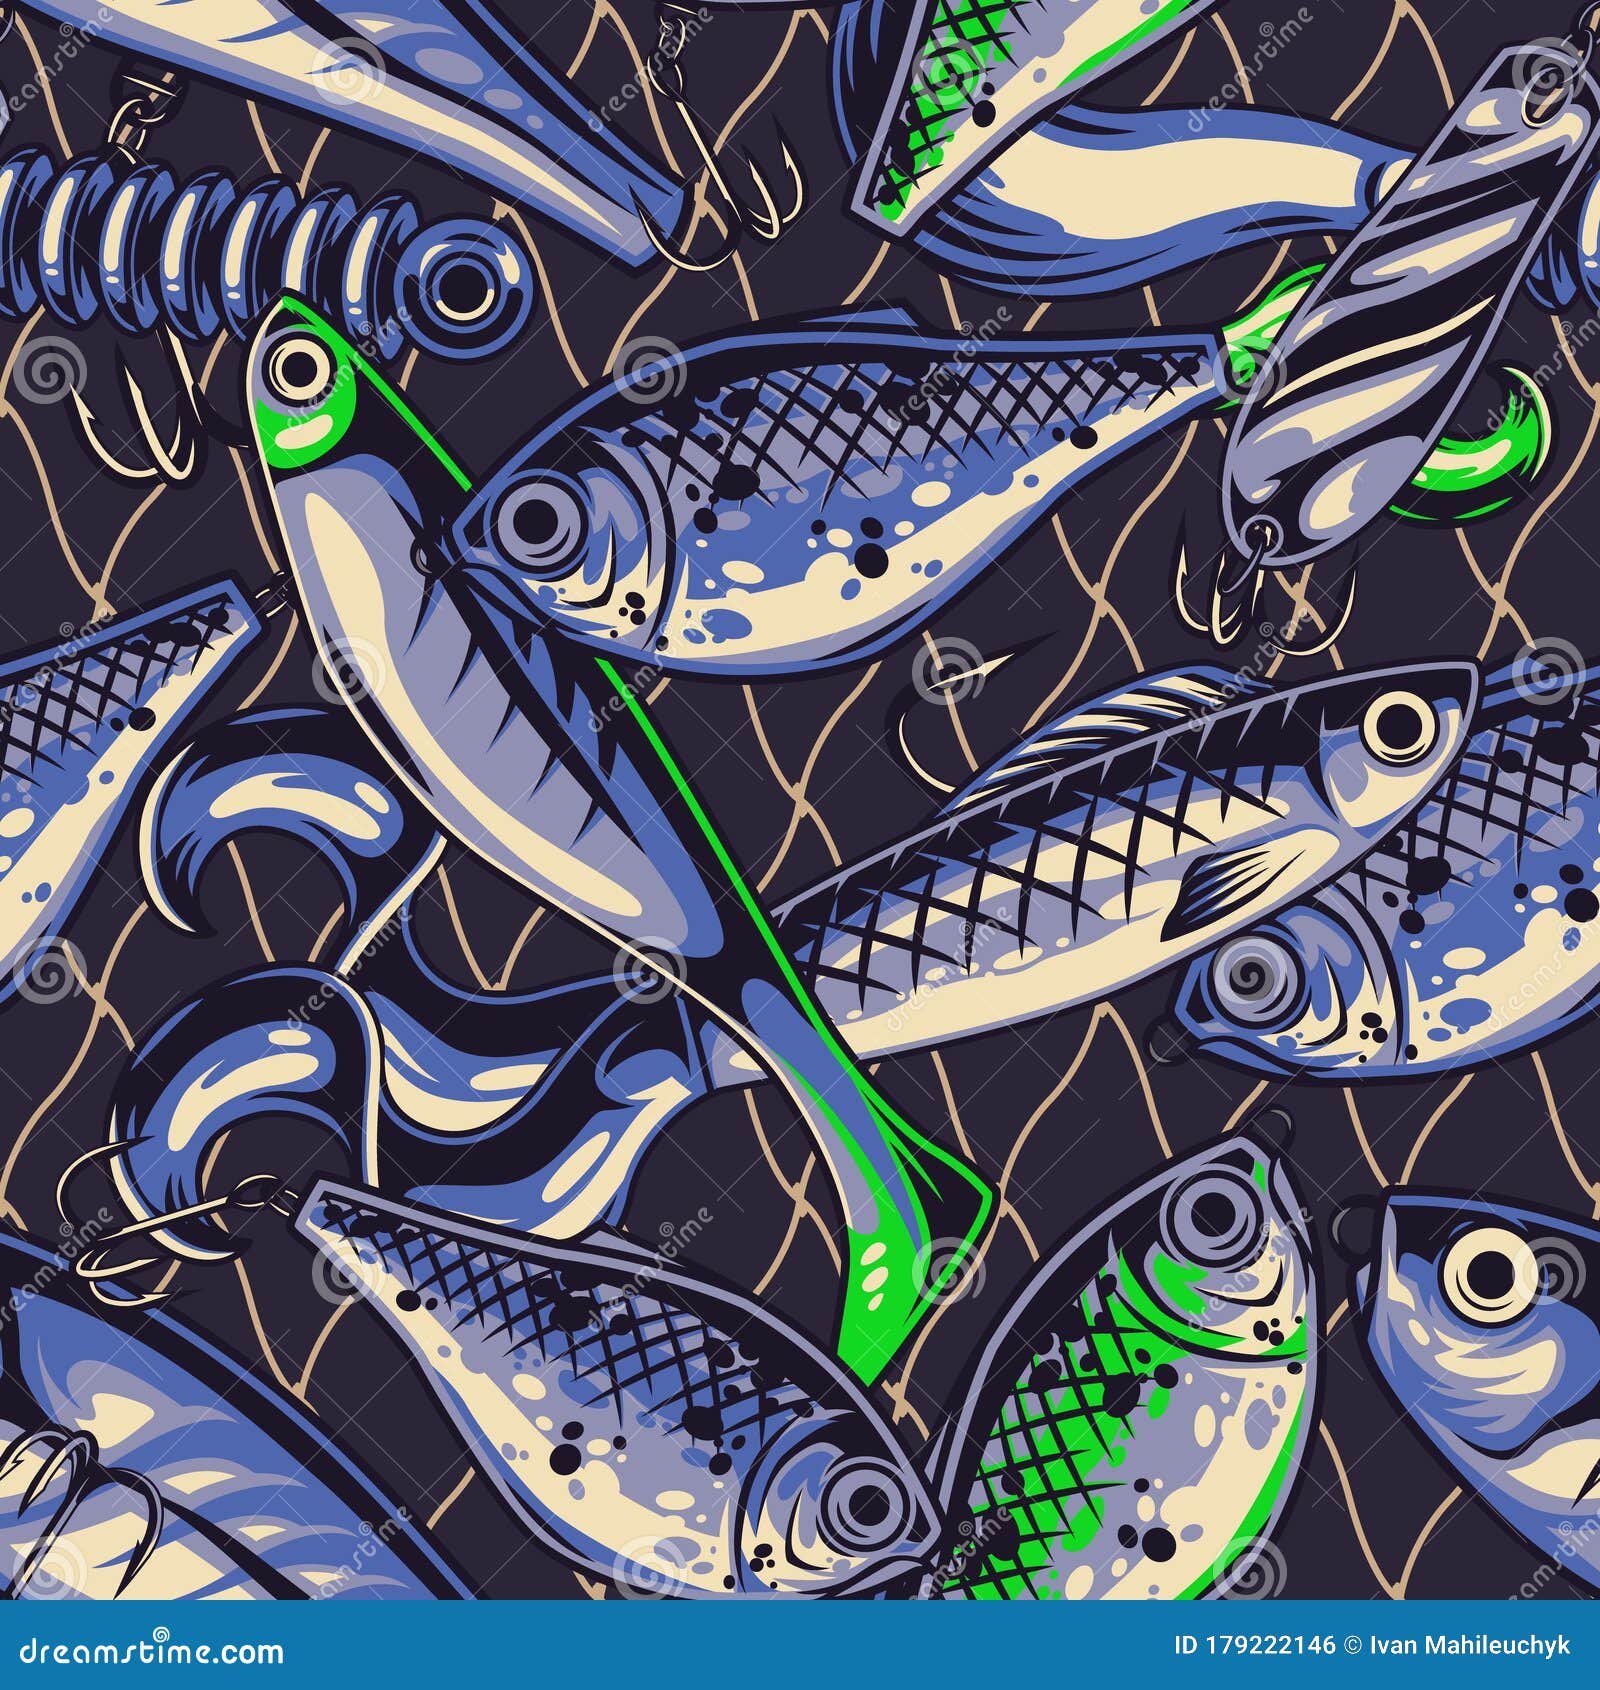 Download Fishing Lures Vintage Seamless Pattern Stock Vector - Illustration of colorful, lure: 179222146